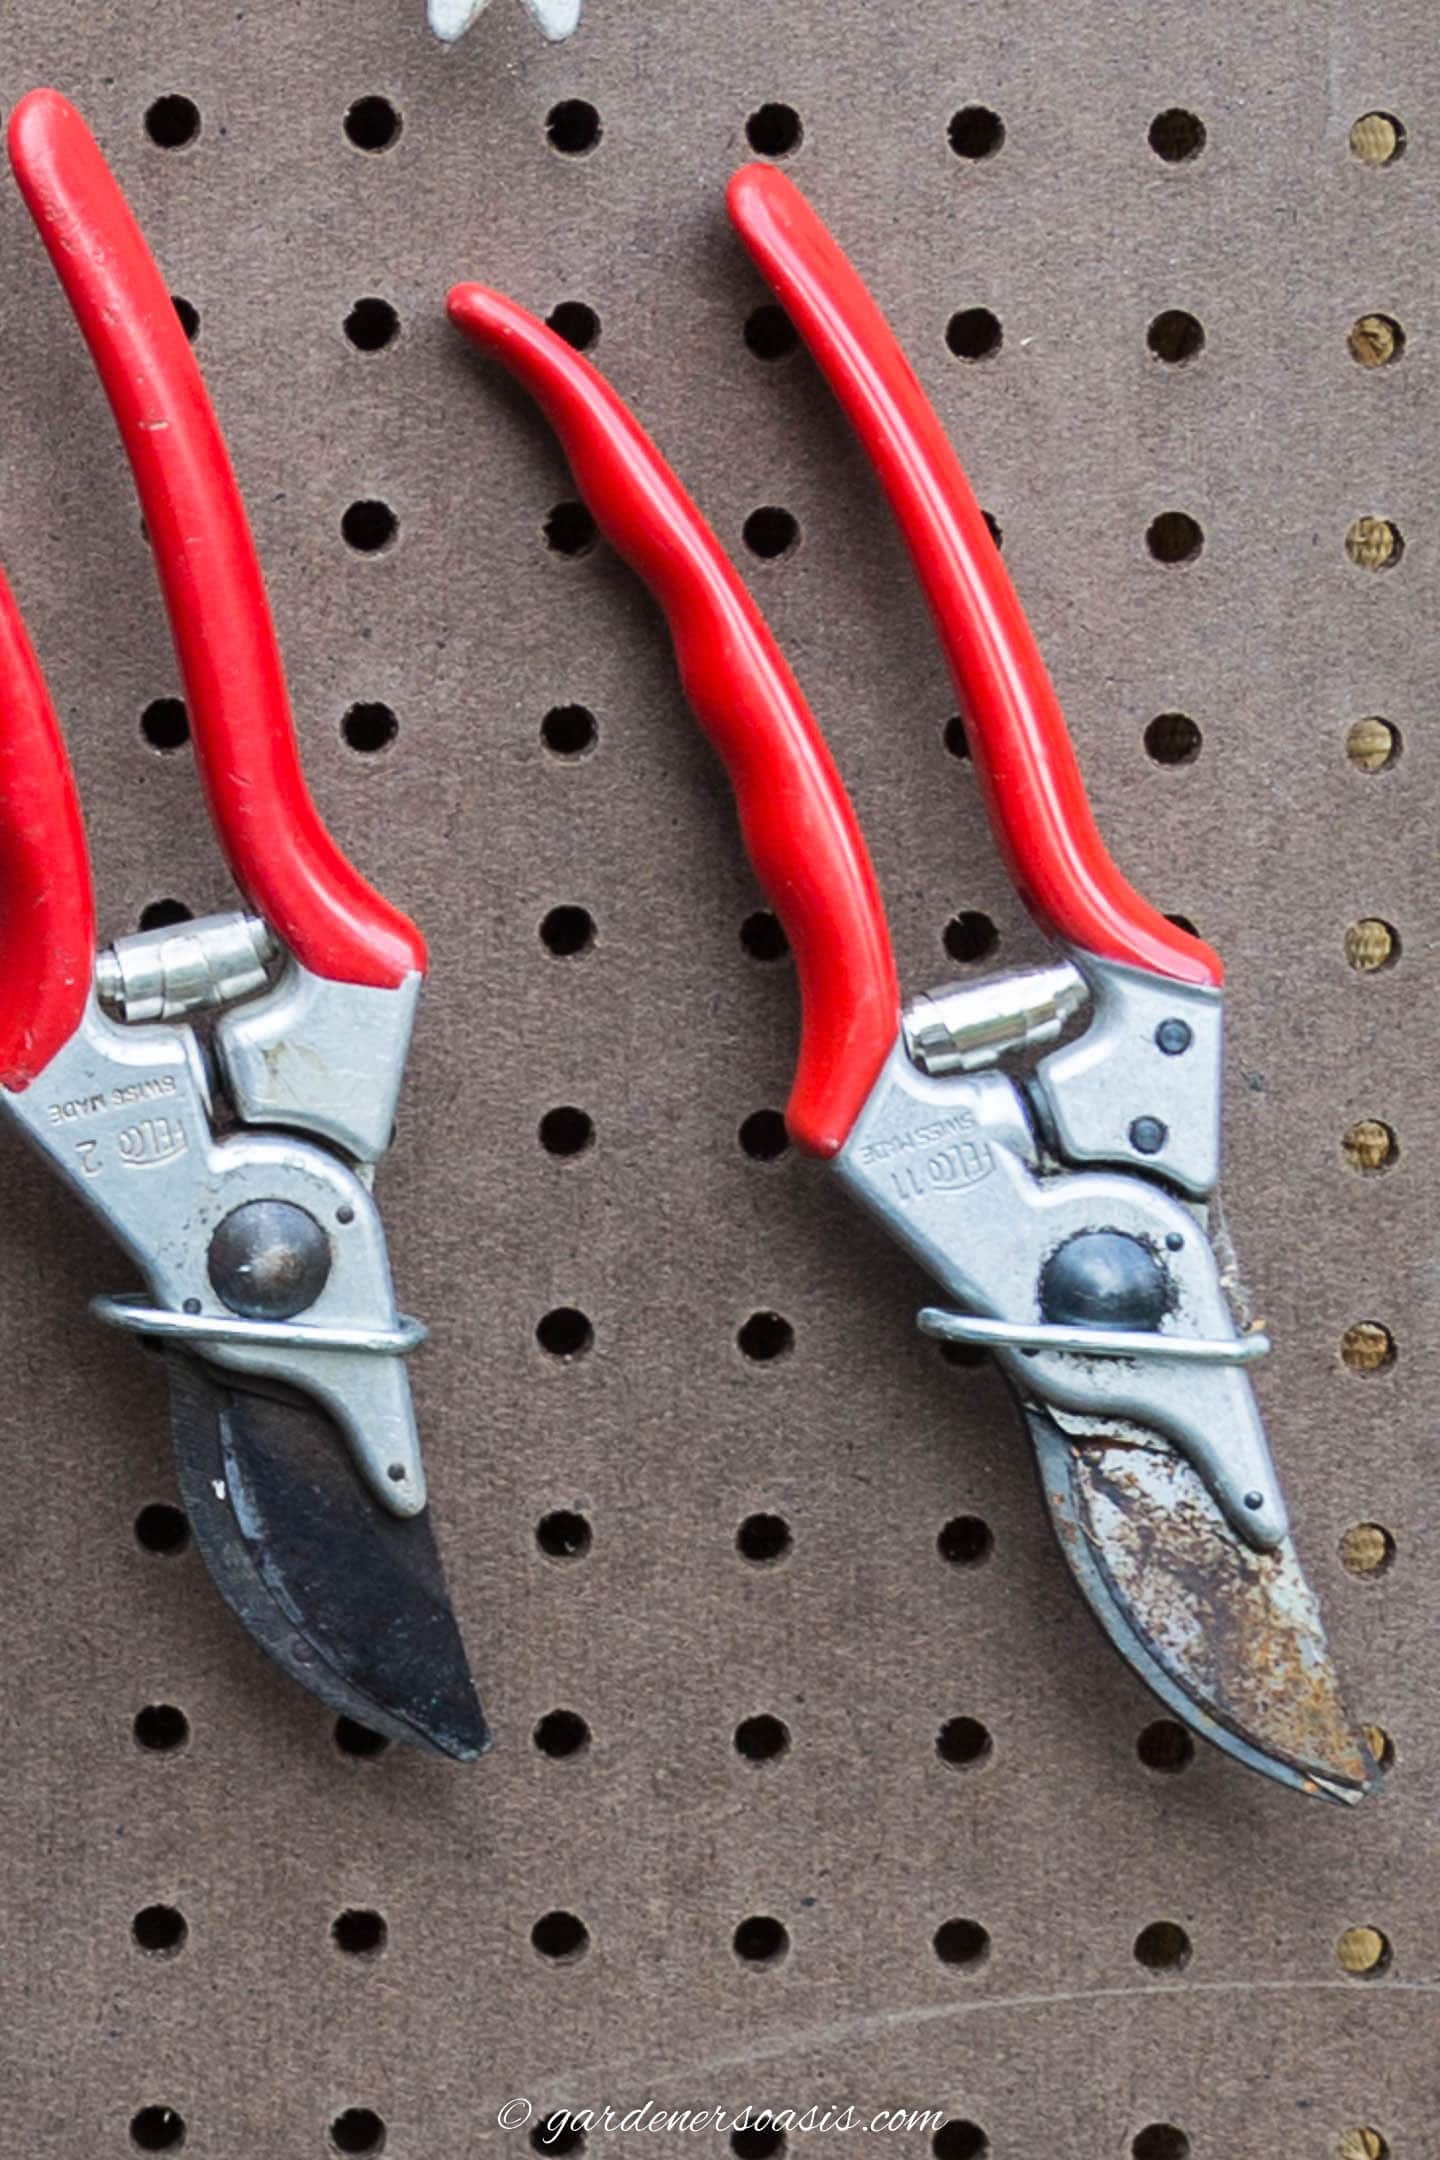 Garden pruners hung on pegboard with plier hooks